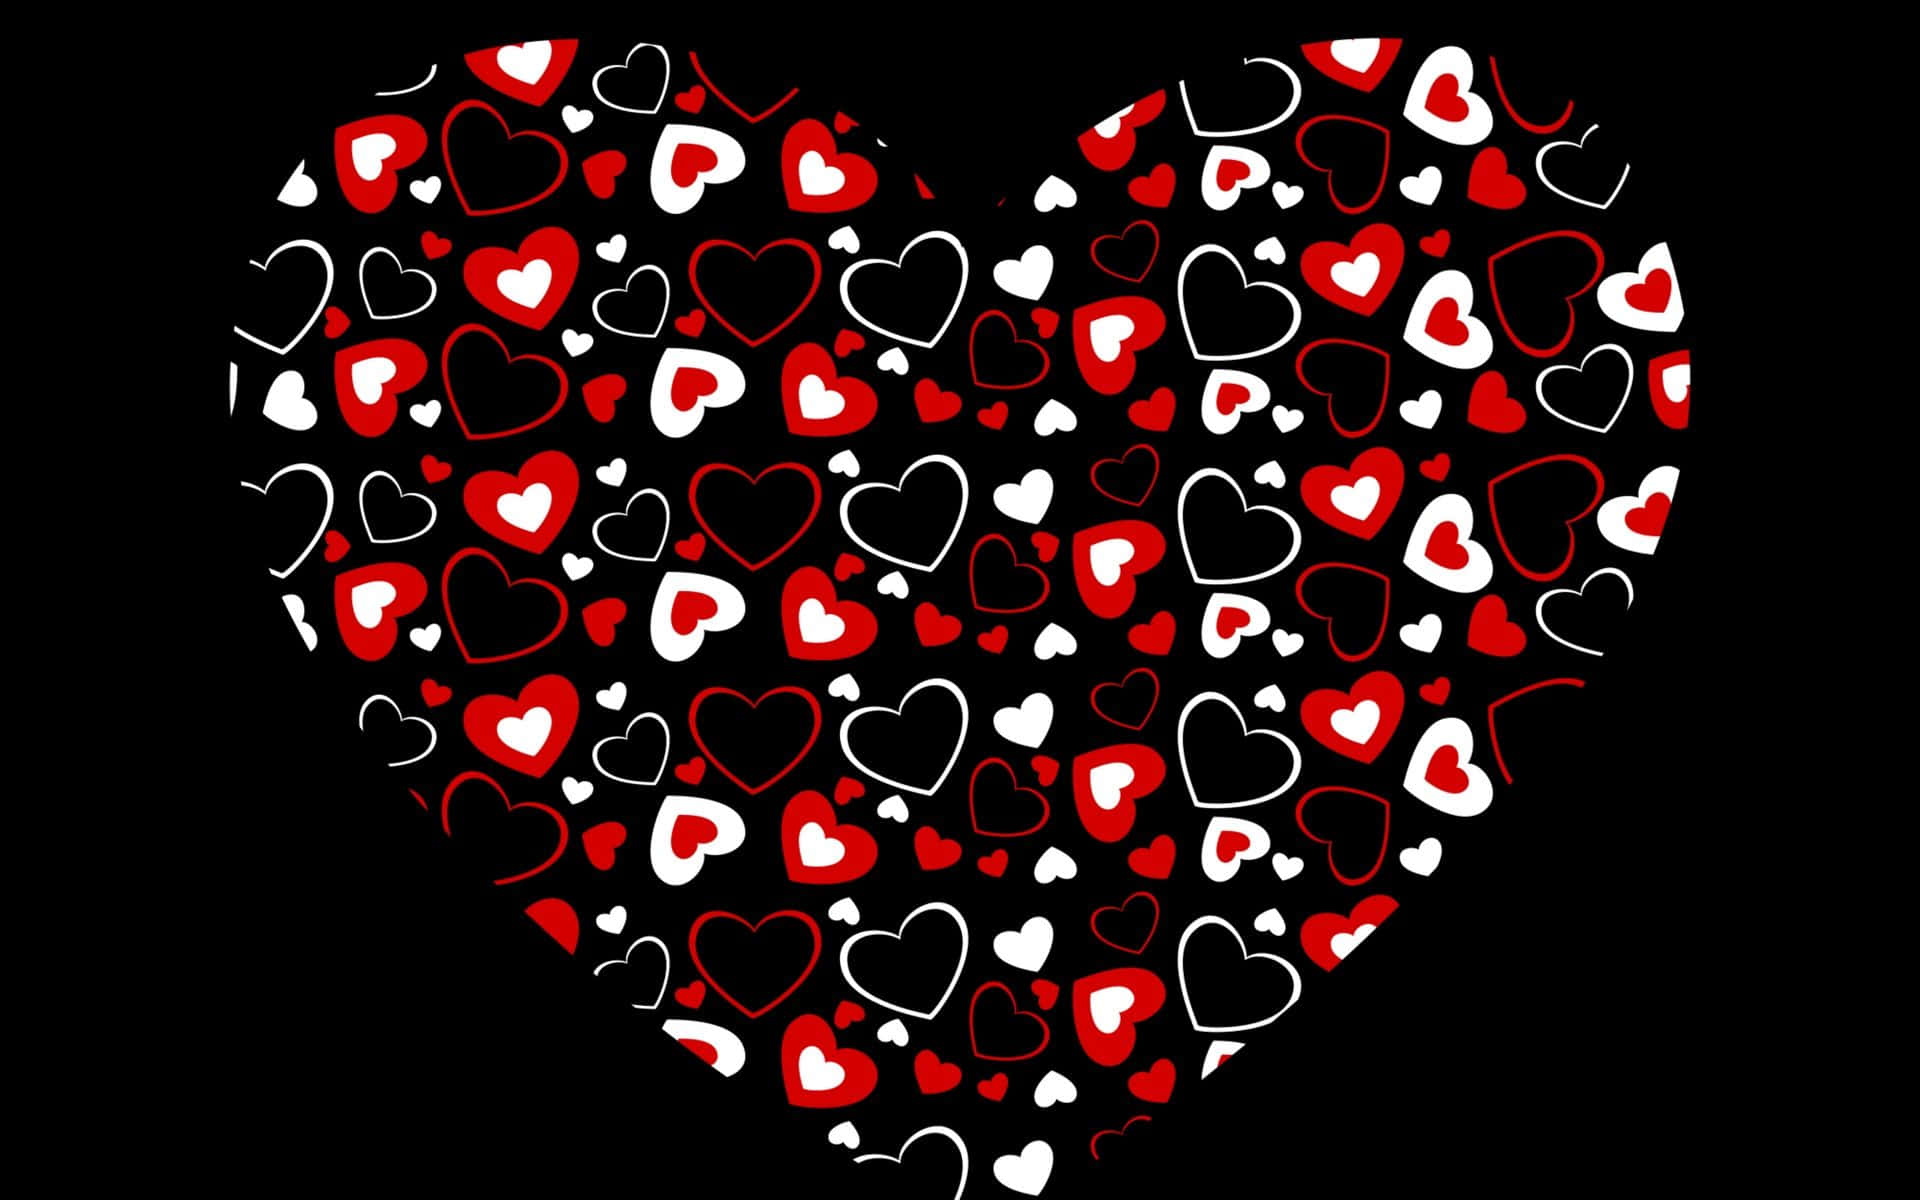 Captivating Black and White Heart Wallpaper